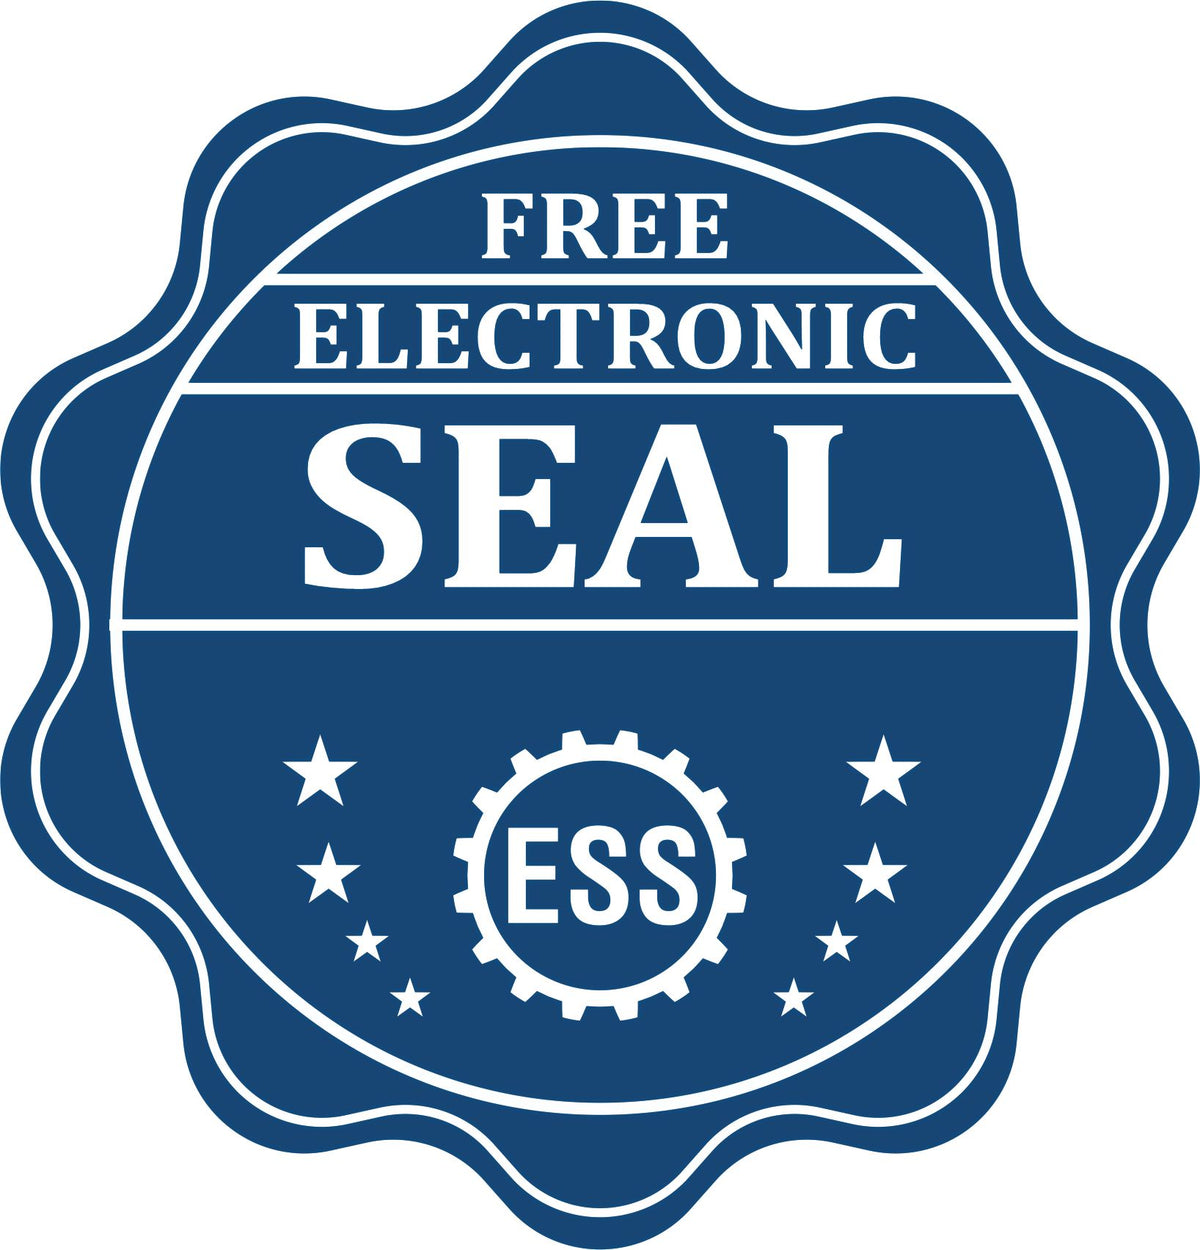 A badge showing a free electronic seal for the Slim Pre-Inked Nevada Professional Geologist Seal Stamp with stars and the ESS gear on the emblem.